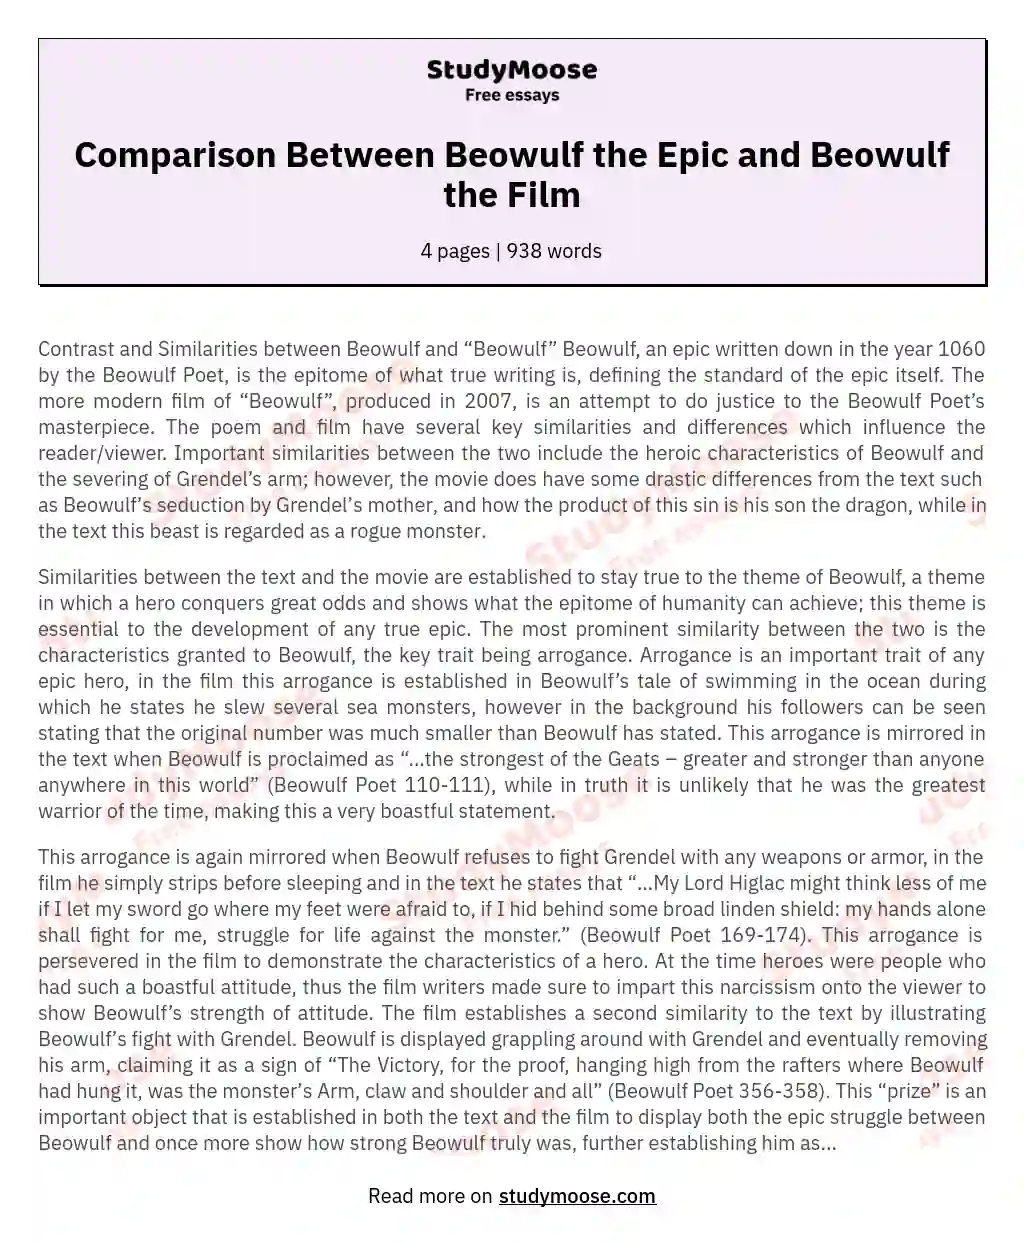 Comparison Between Beowulf the Epic and Beowulf the Film essay